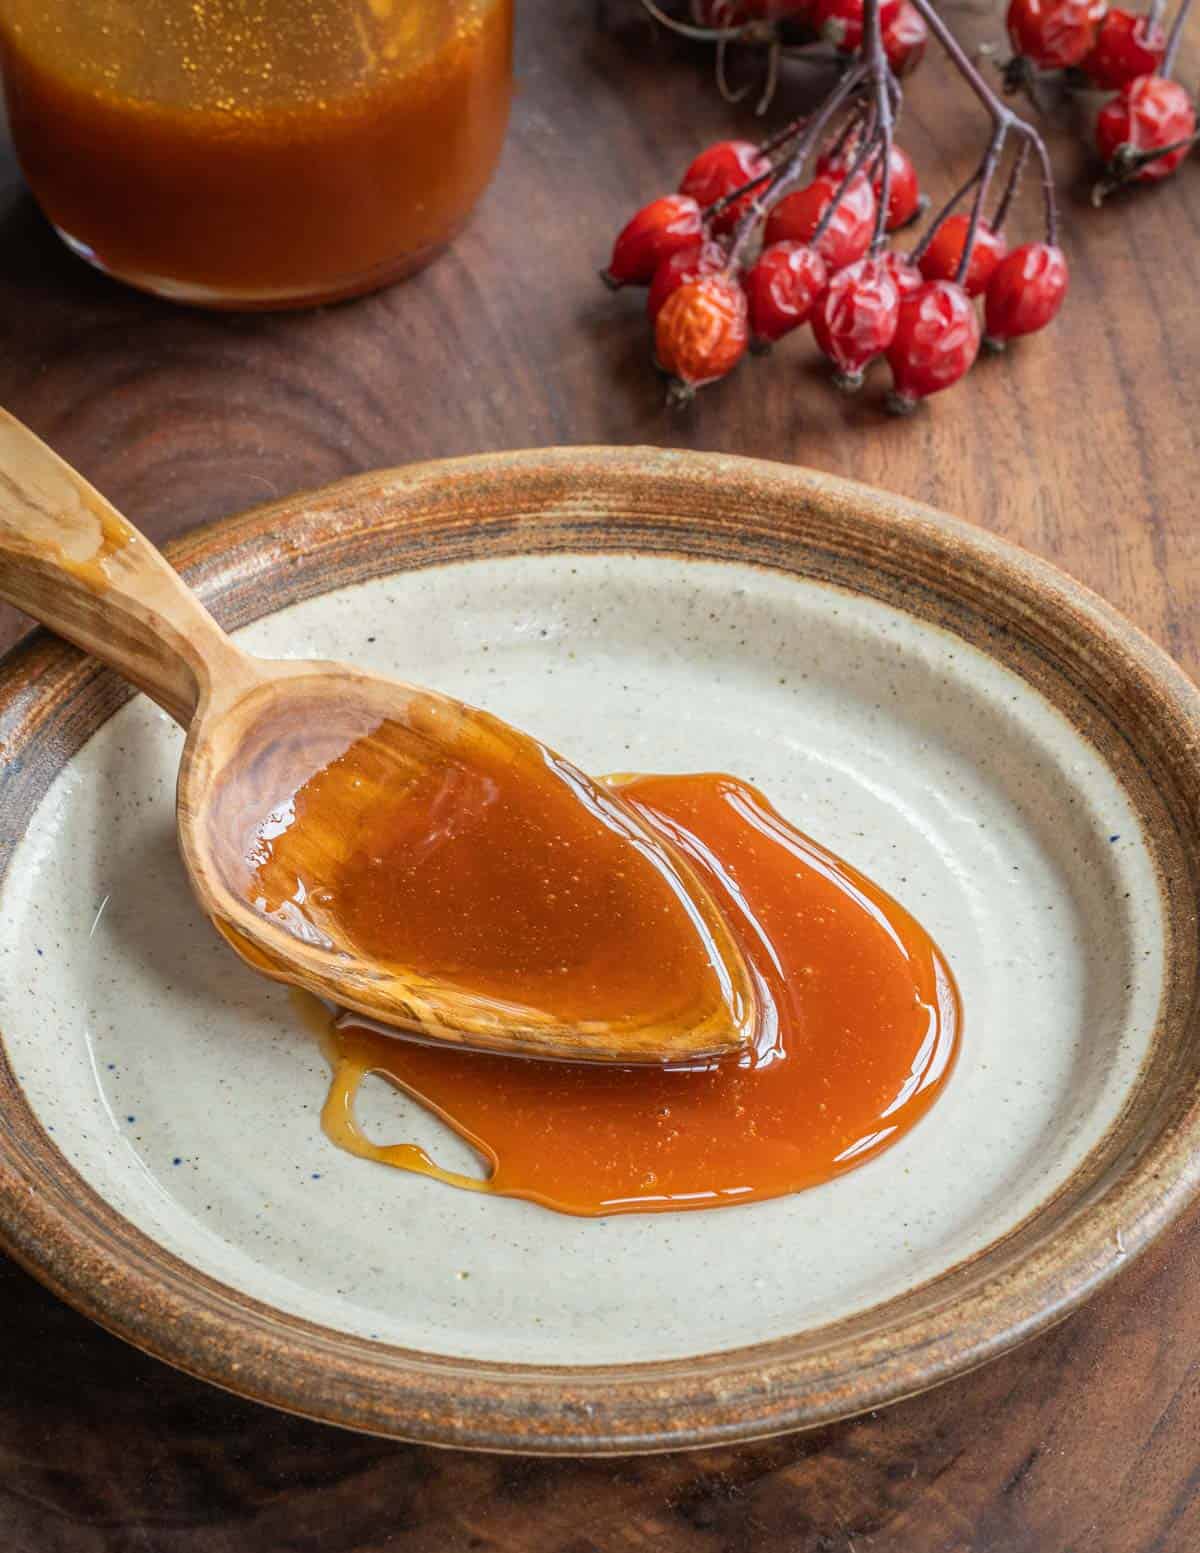 An applewood spoon with rosehip syrup on a plate next to fresh rosehips and jar of syrup.